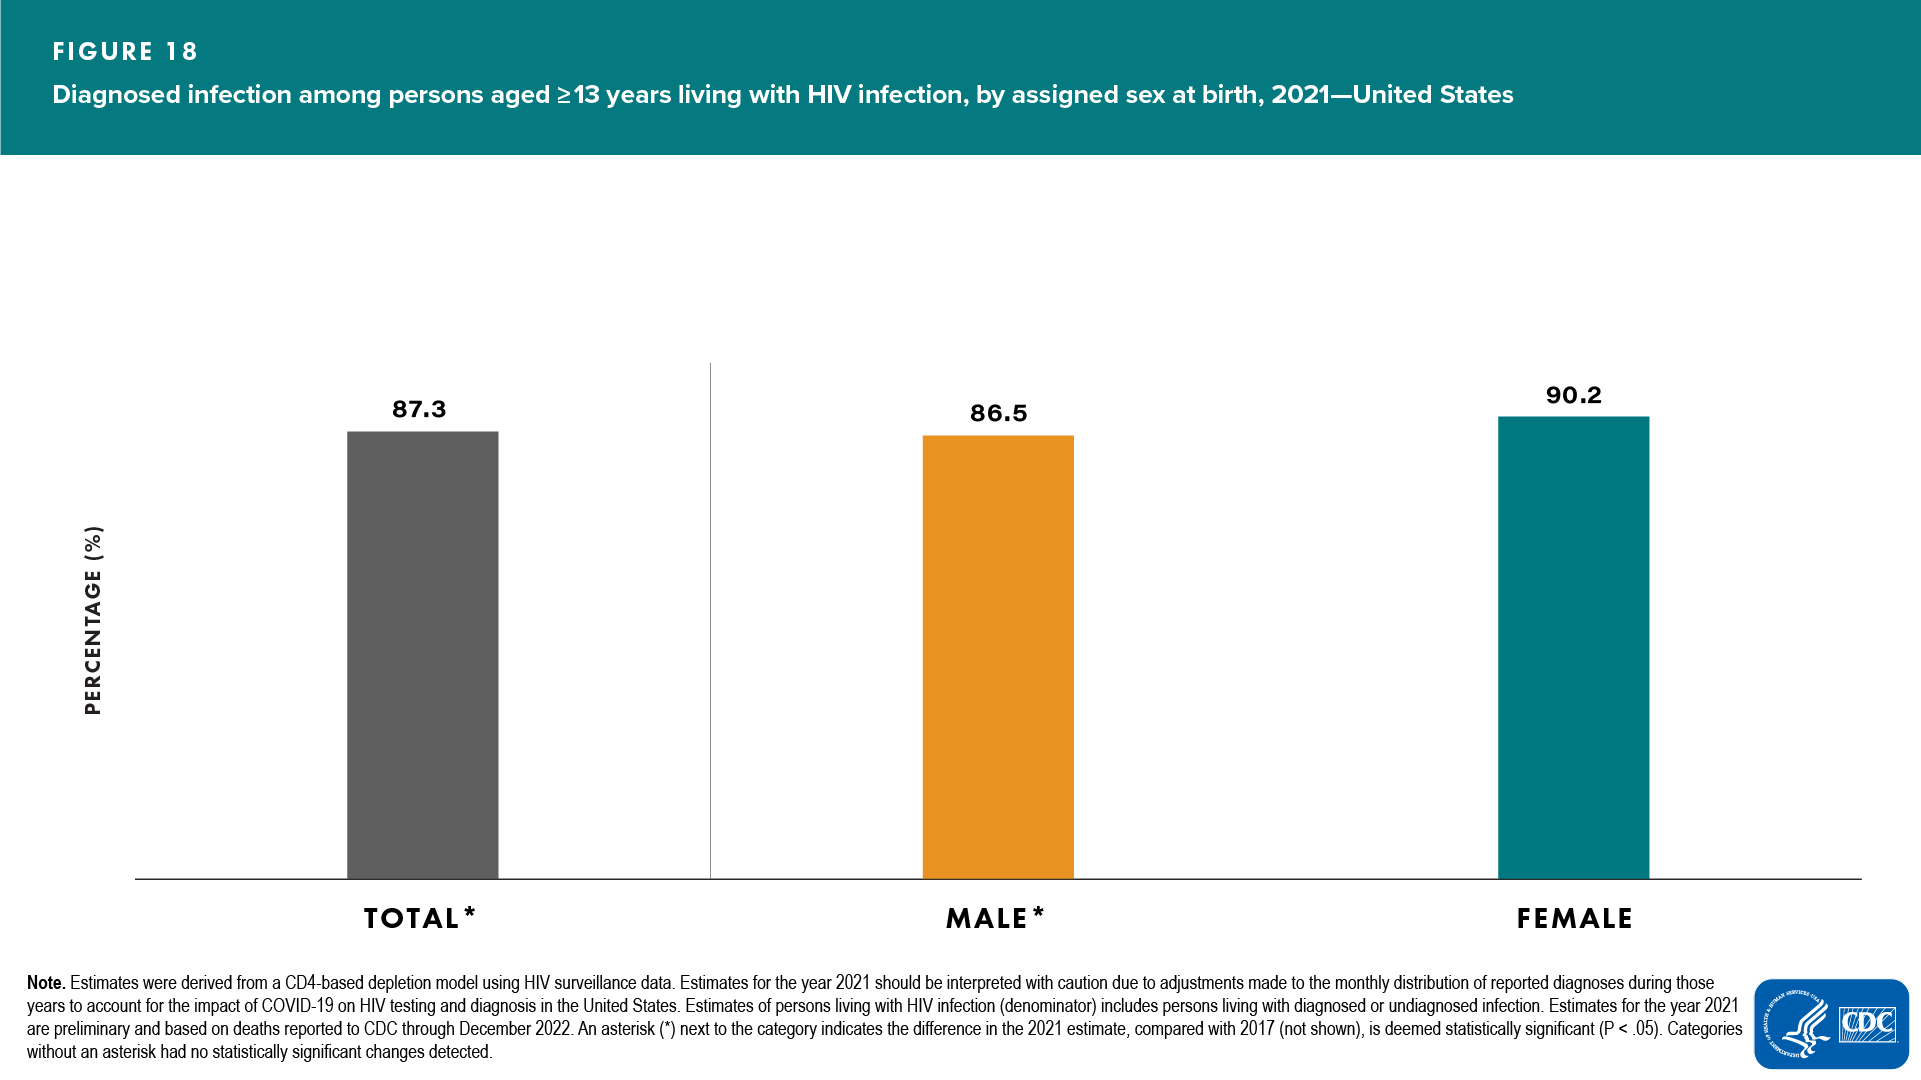 Figure 18. Diagnosed infection among persons aged ≥13 years living with HIV infection, by assigned sex at birth, 2021—United States